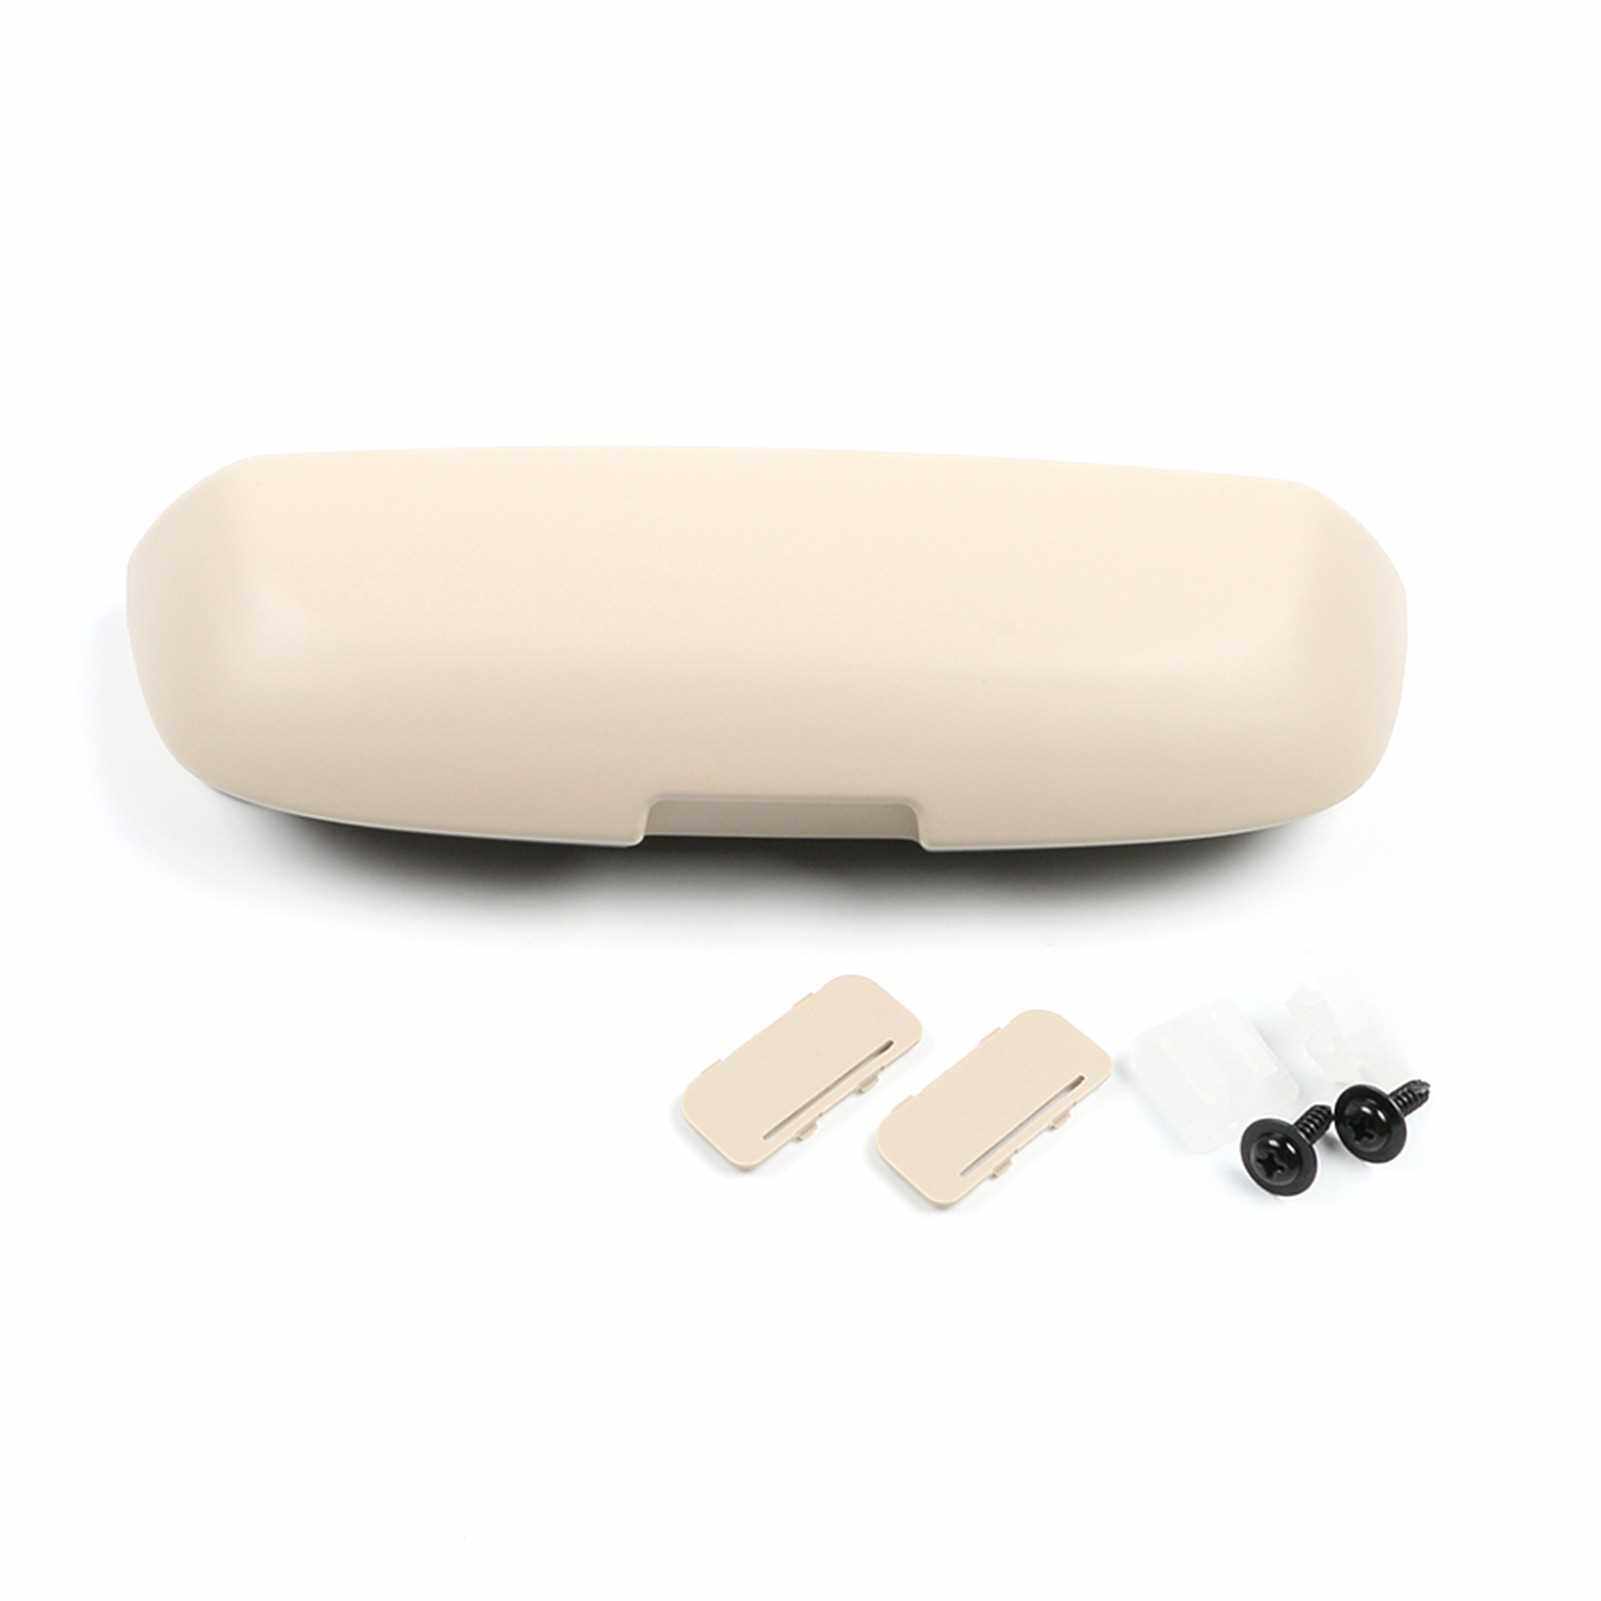 Sunglasses Holder Glasses Case Storage Box Overhead Grab Handle Replacement for BMW 1 3 5 6 7 X3 X5 X7 Series (Beige)